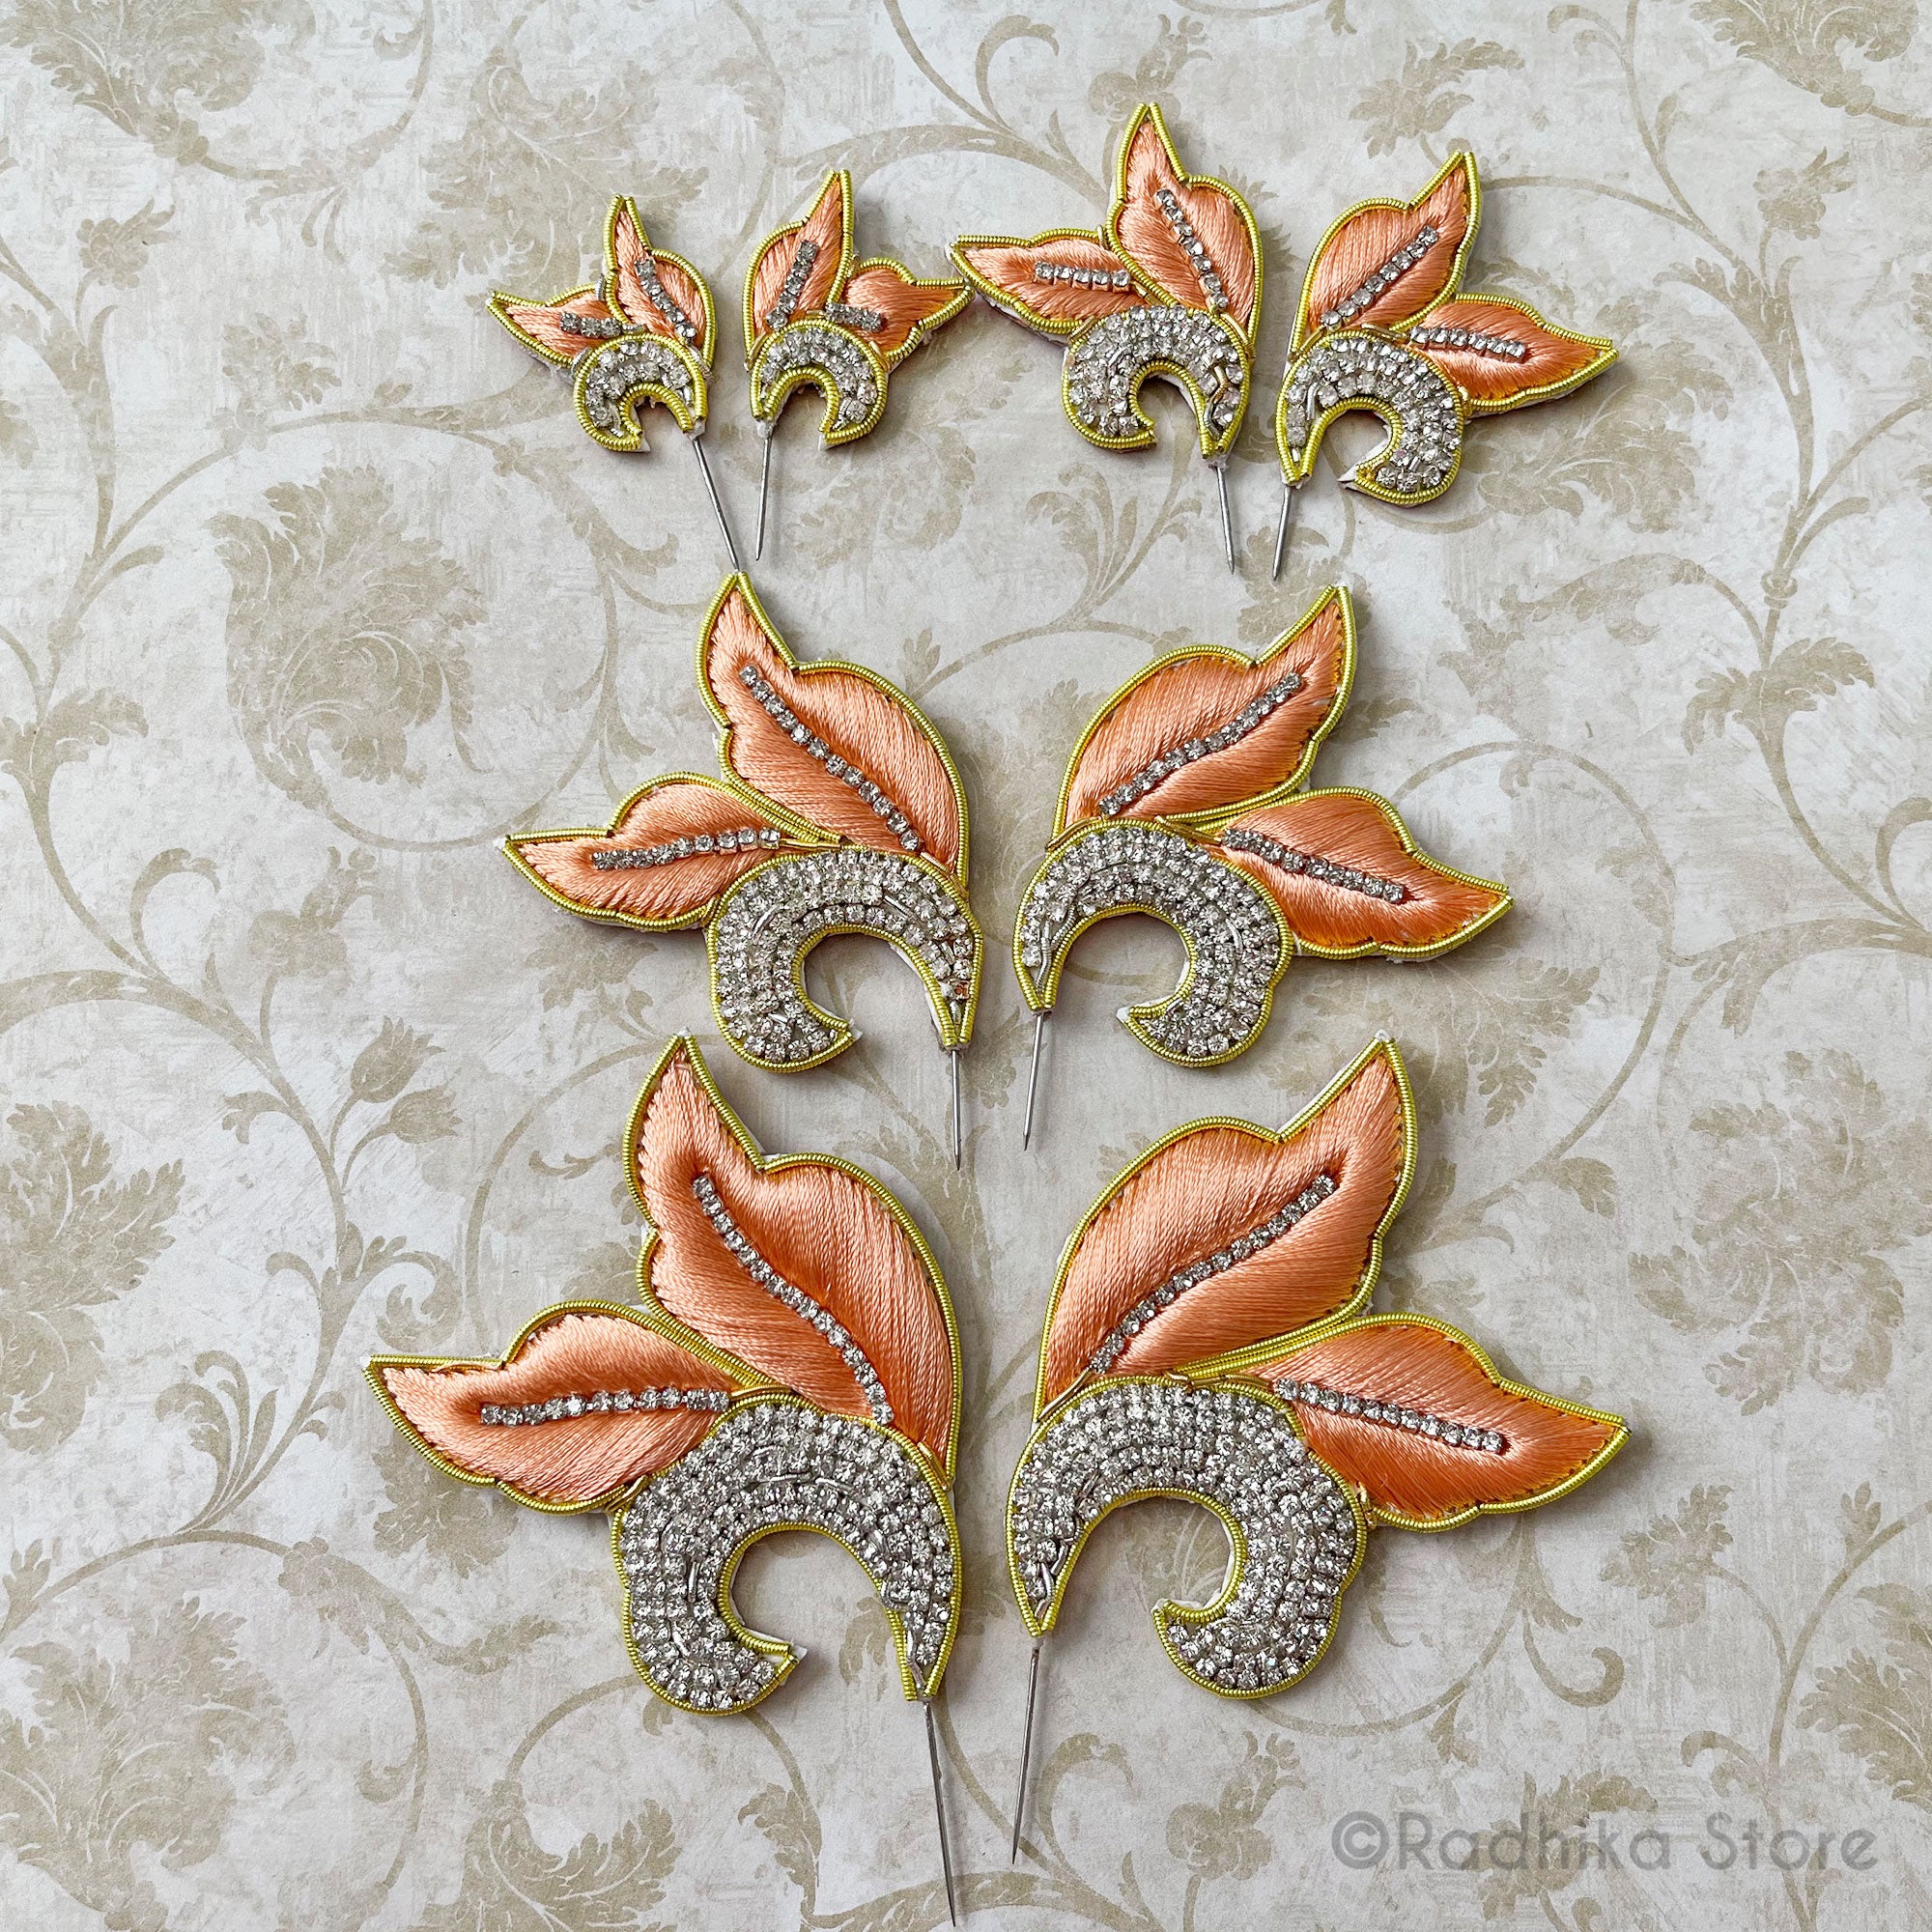 Light Peach with Gold Embroidery Turban Pins - Leaf Curls - Set of 2